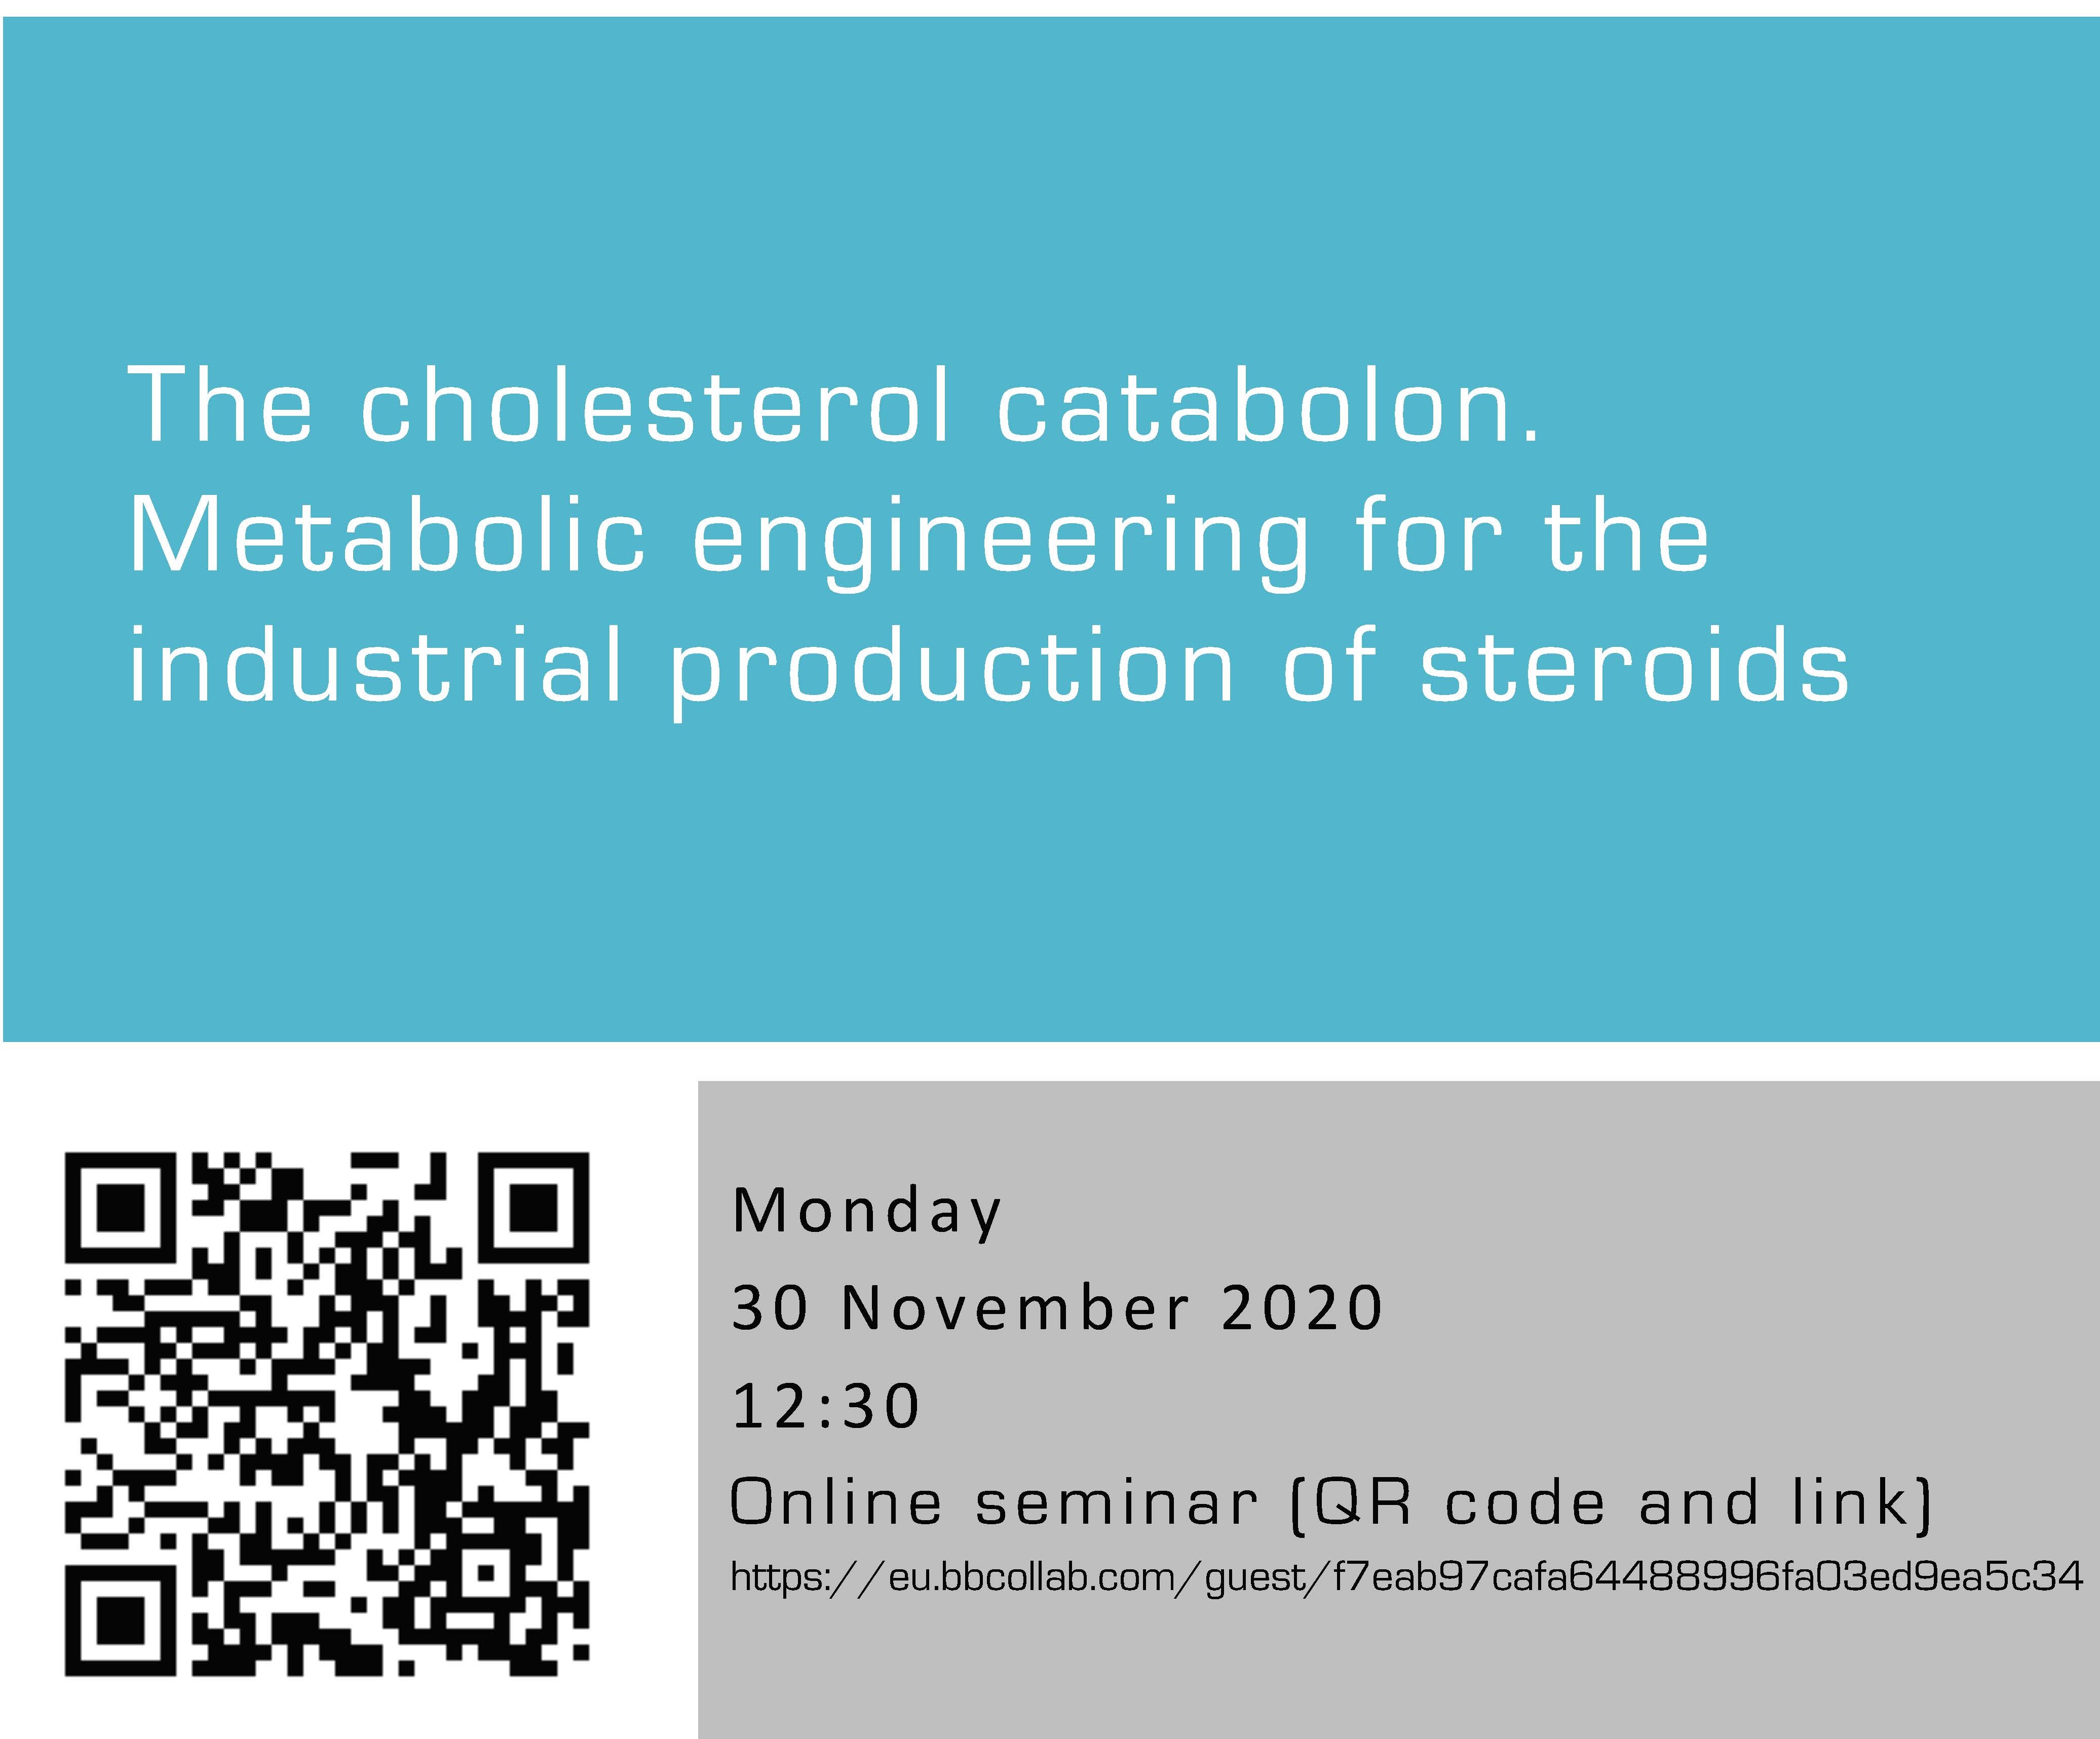 The cholesterol catabolon. Metabolic engineering for the industrial production of steroids